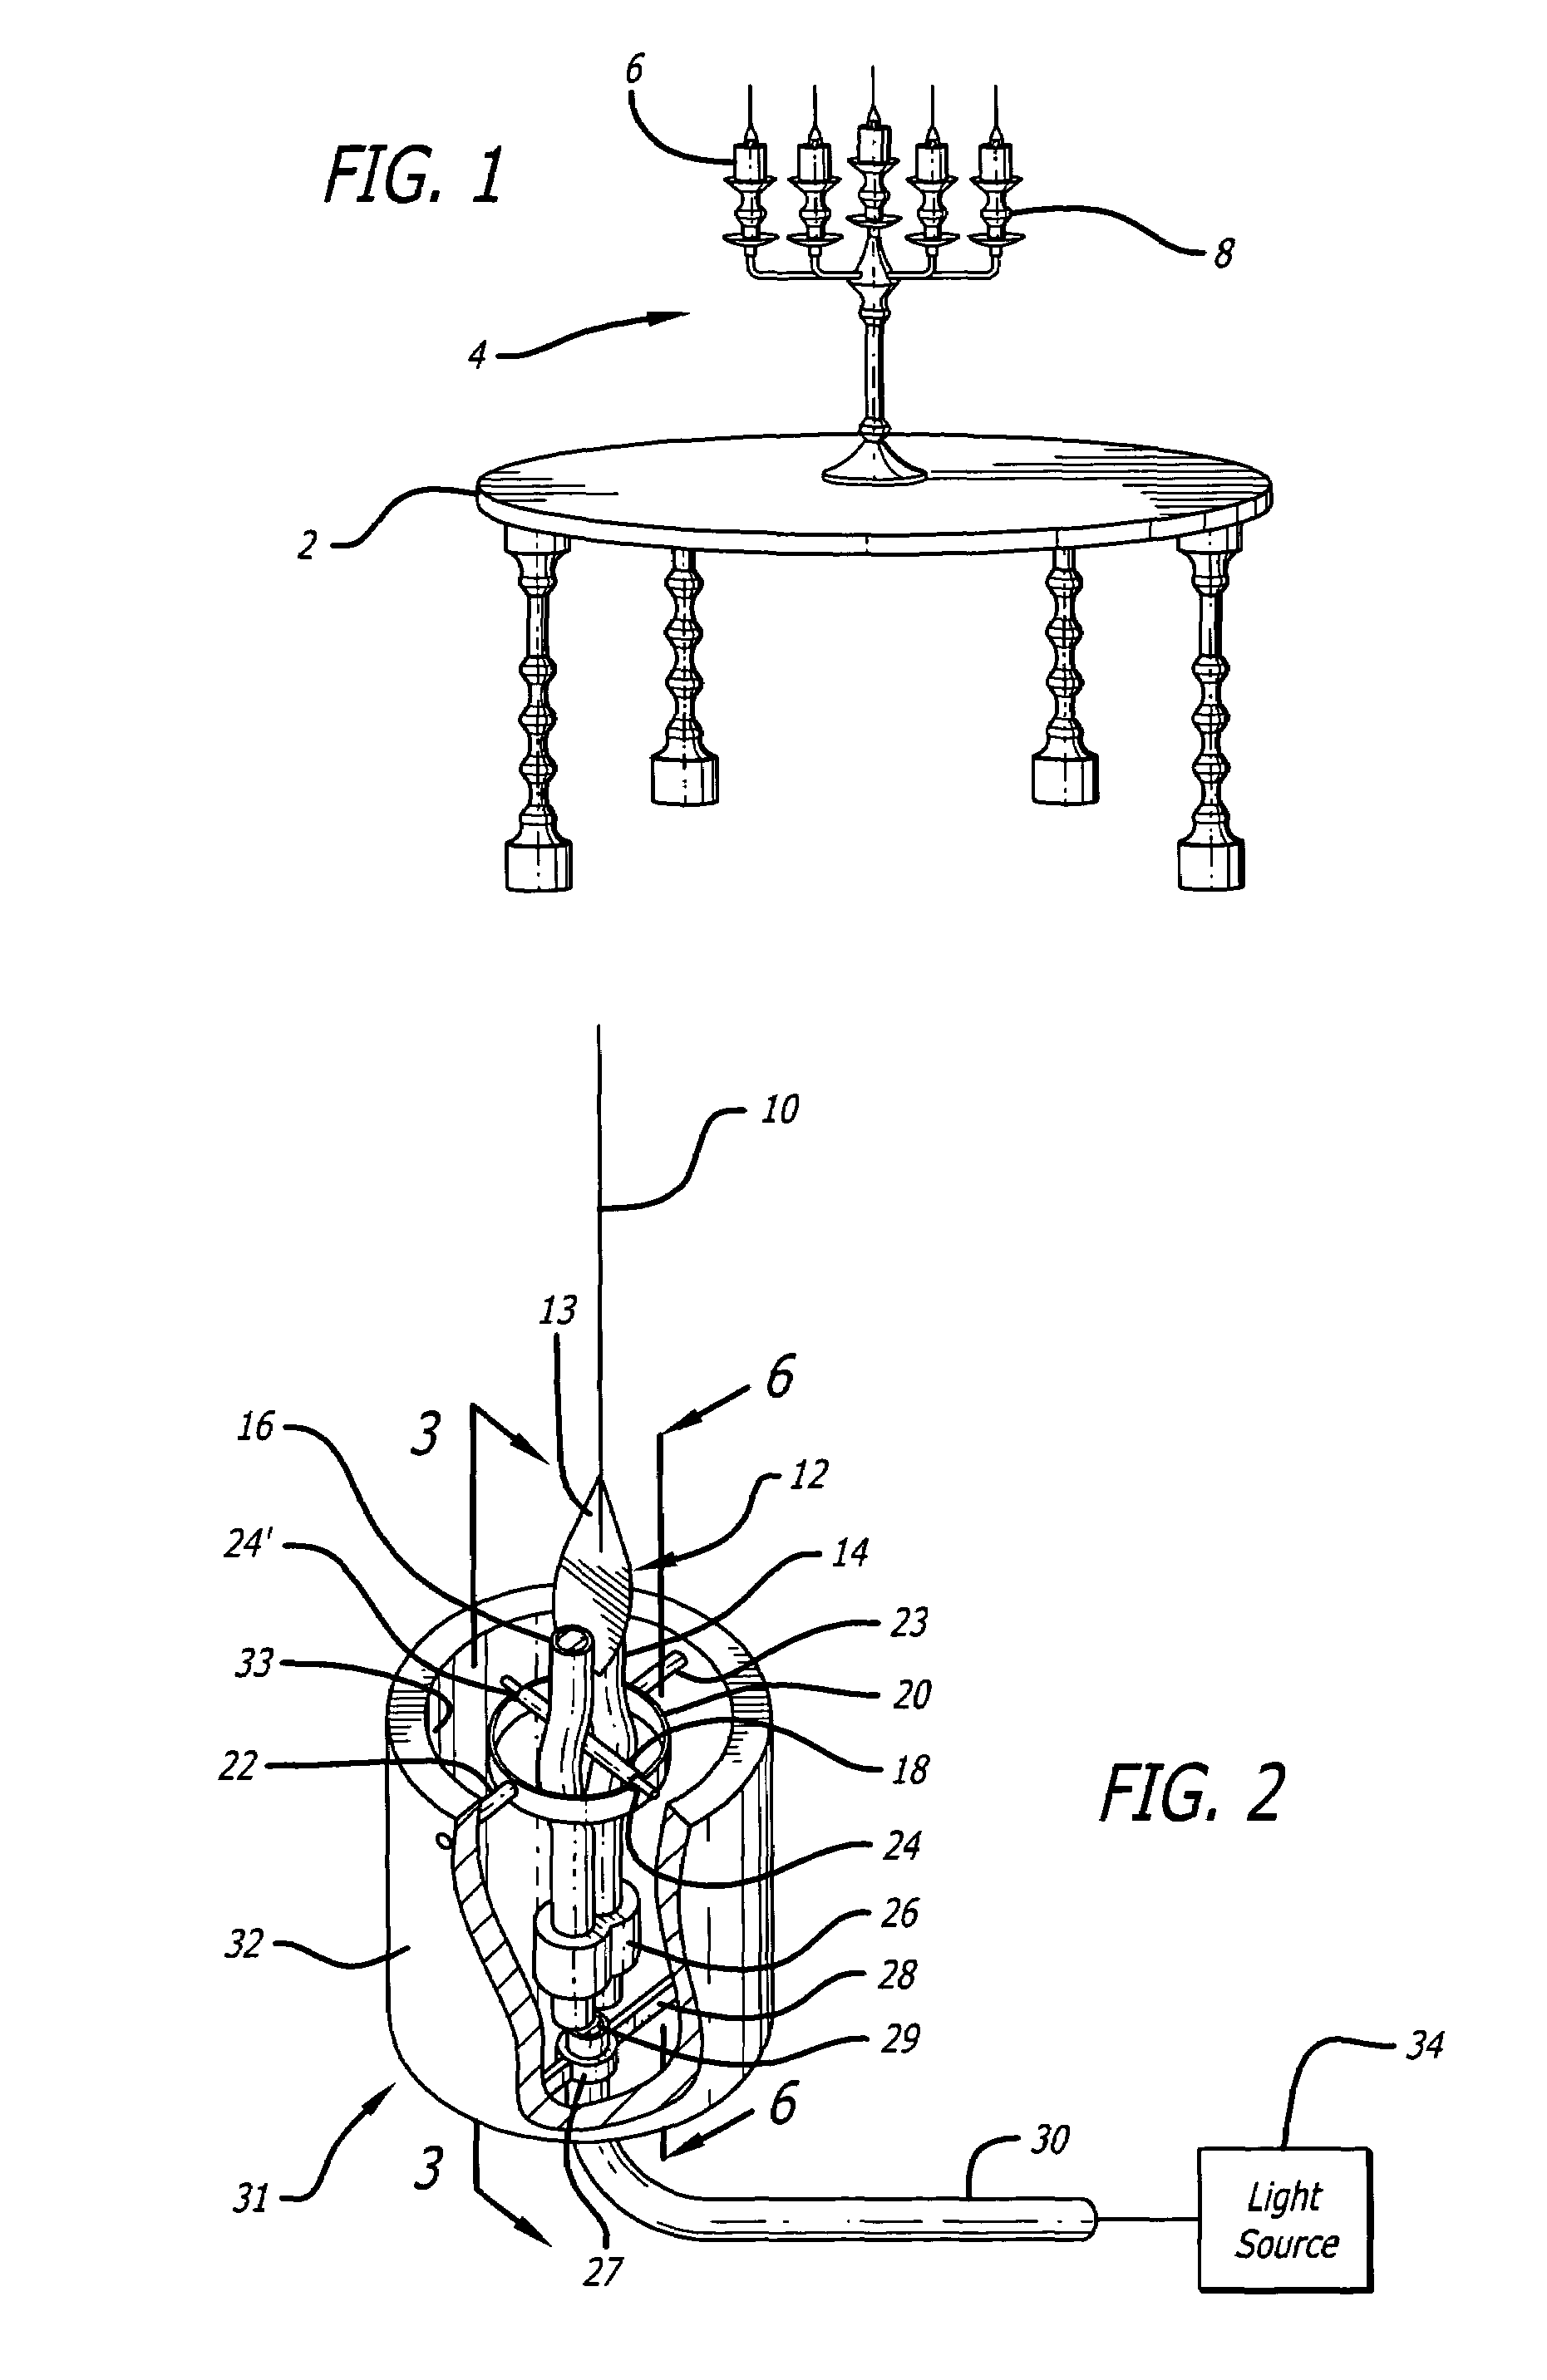 System and method for generating a flickering flame effect